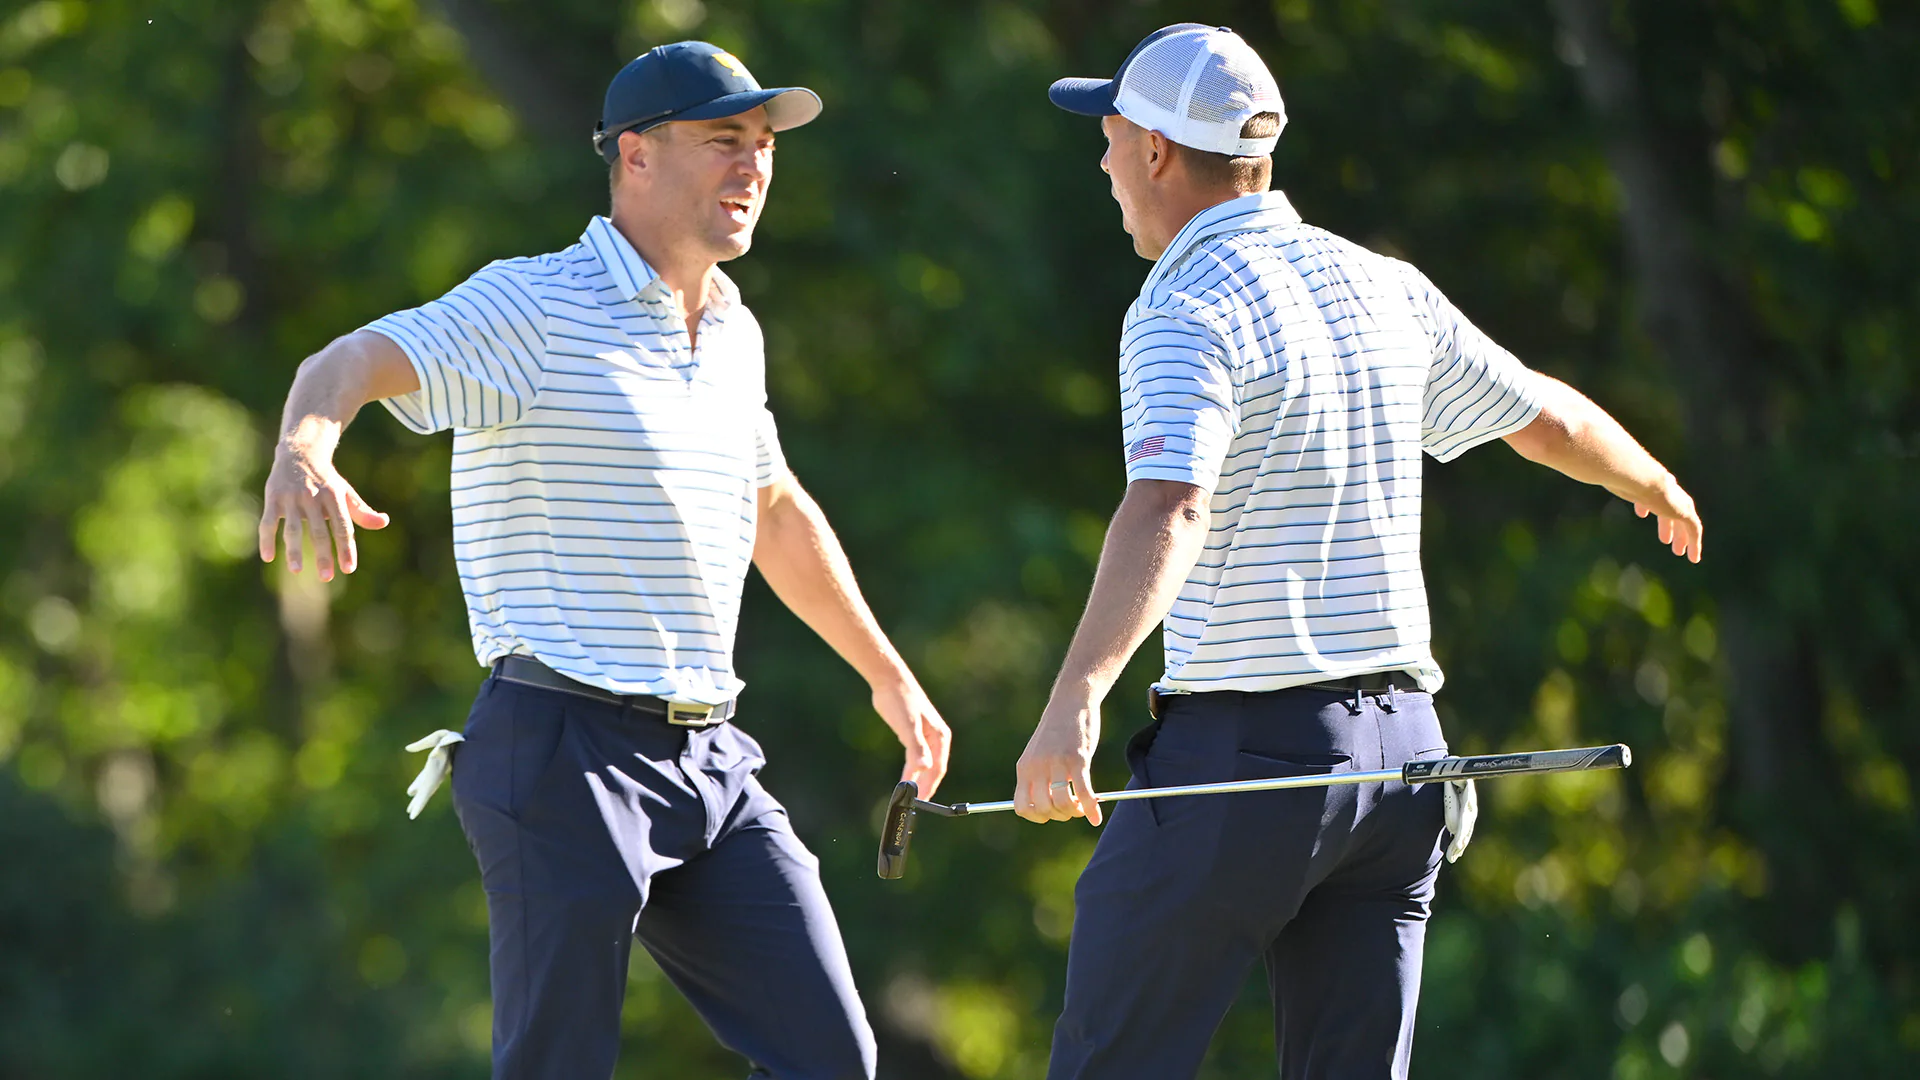 Jordan Spieth and Justin Thomas ride magic short game to thrilling victory